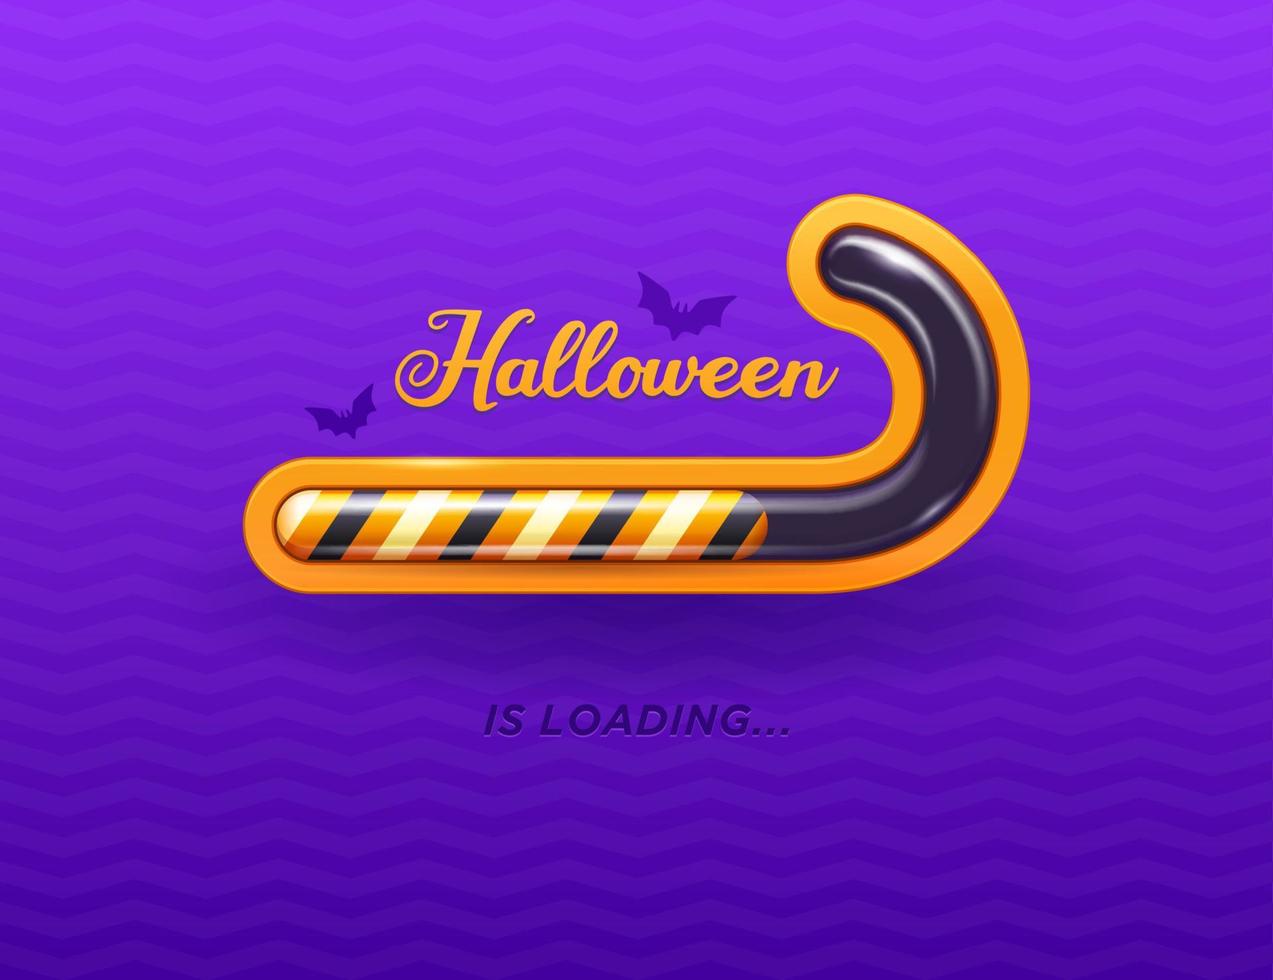 Halloween loading candy cane bar background vector